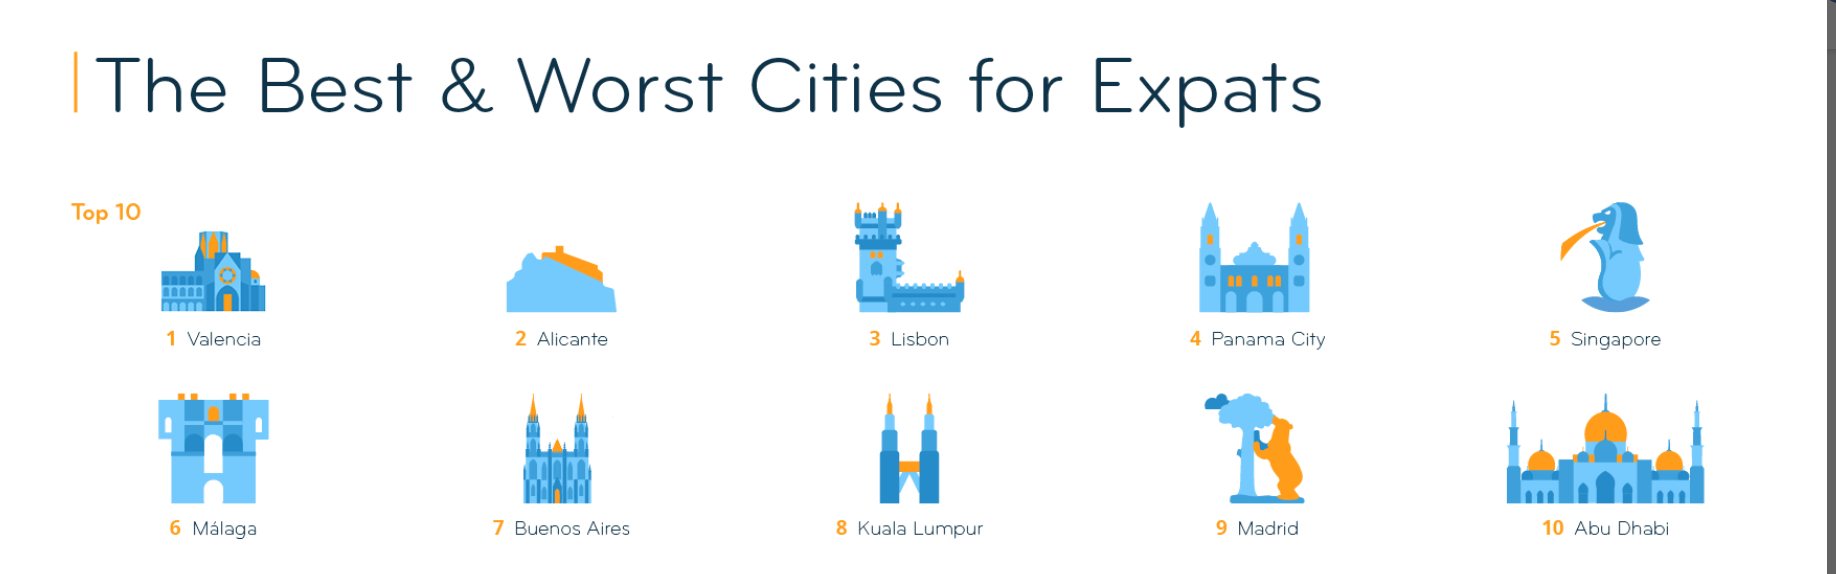 ranking of the best cities for expats 2020